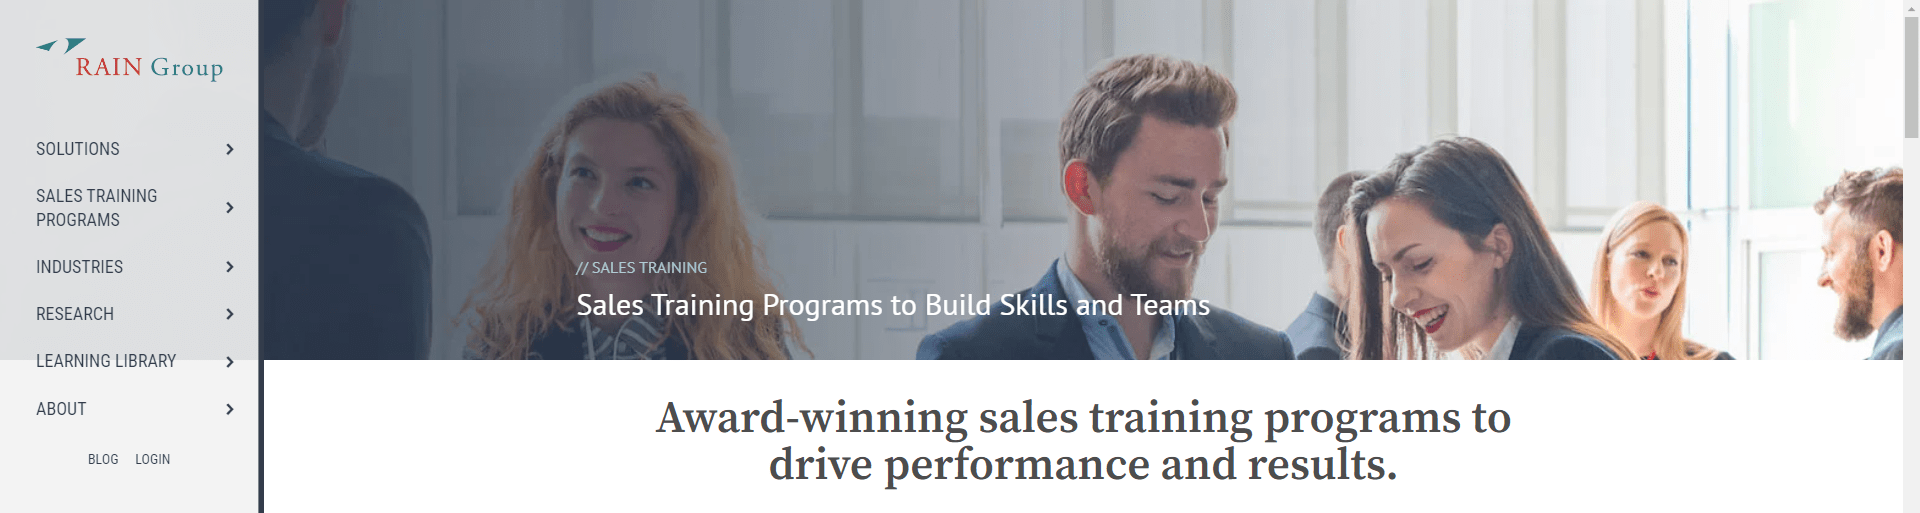 Sales Training Programs to Build Skills and Teams by RAIN Group 